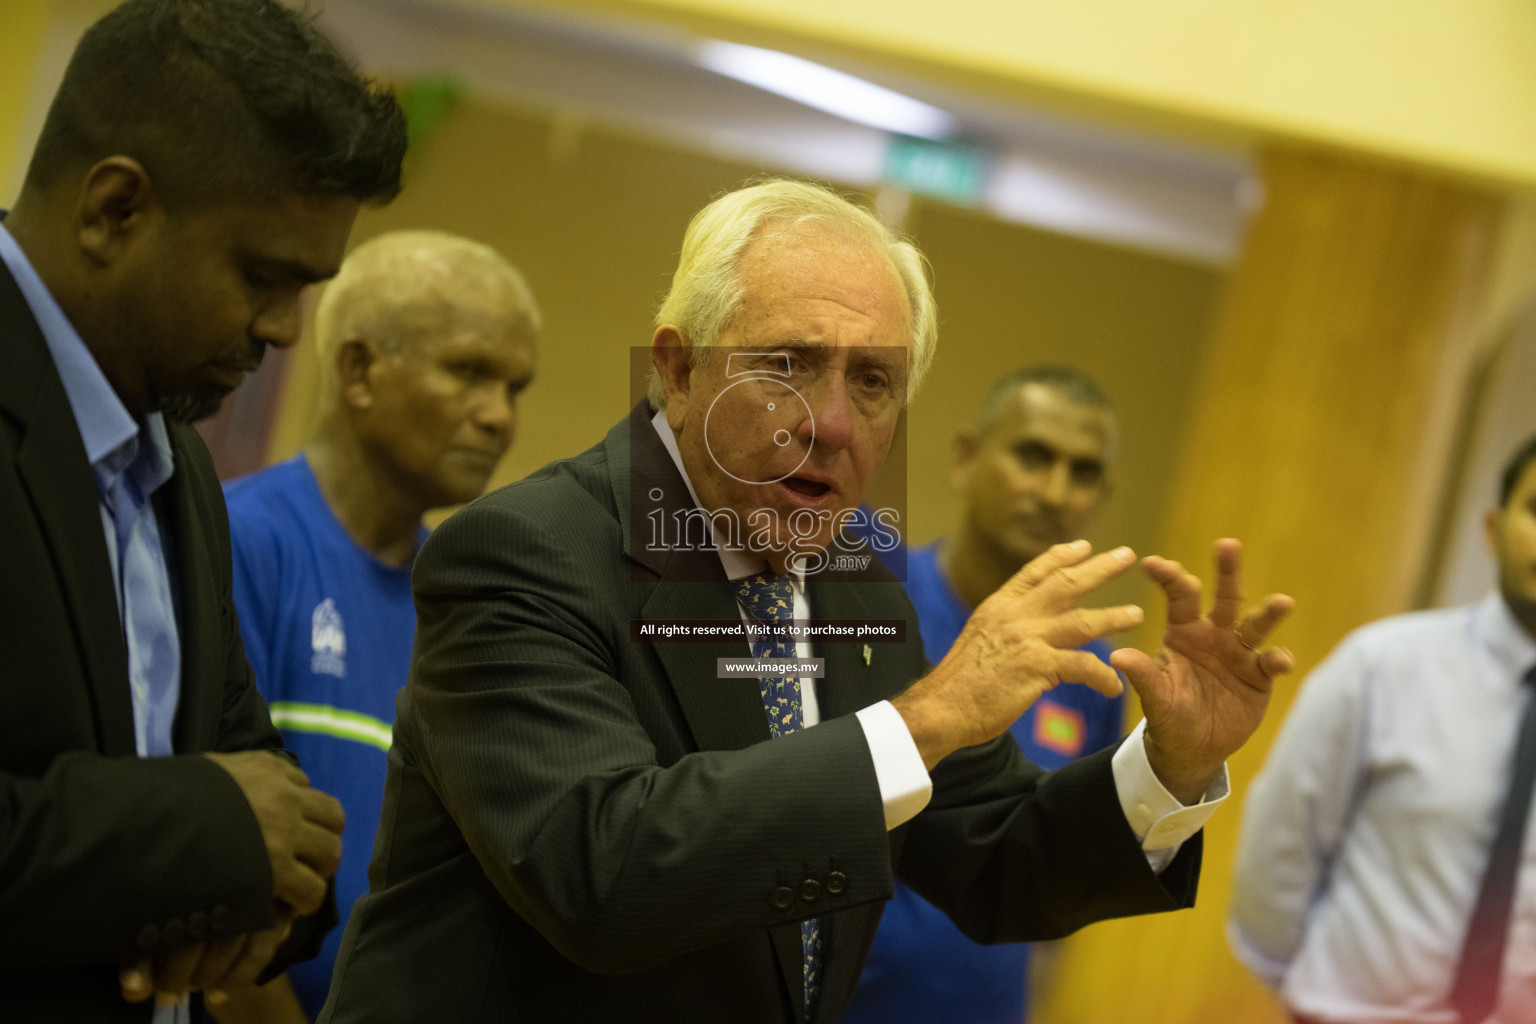 Ceremony to welcome FIVB President